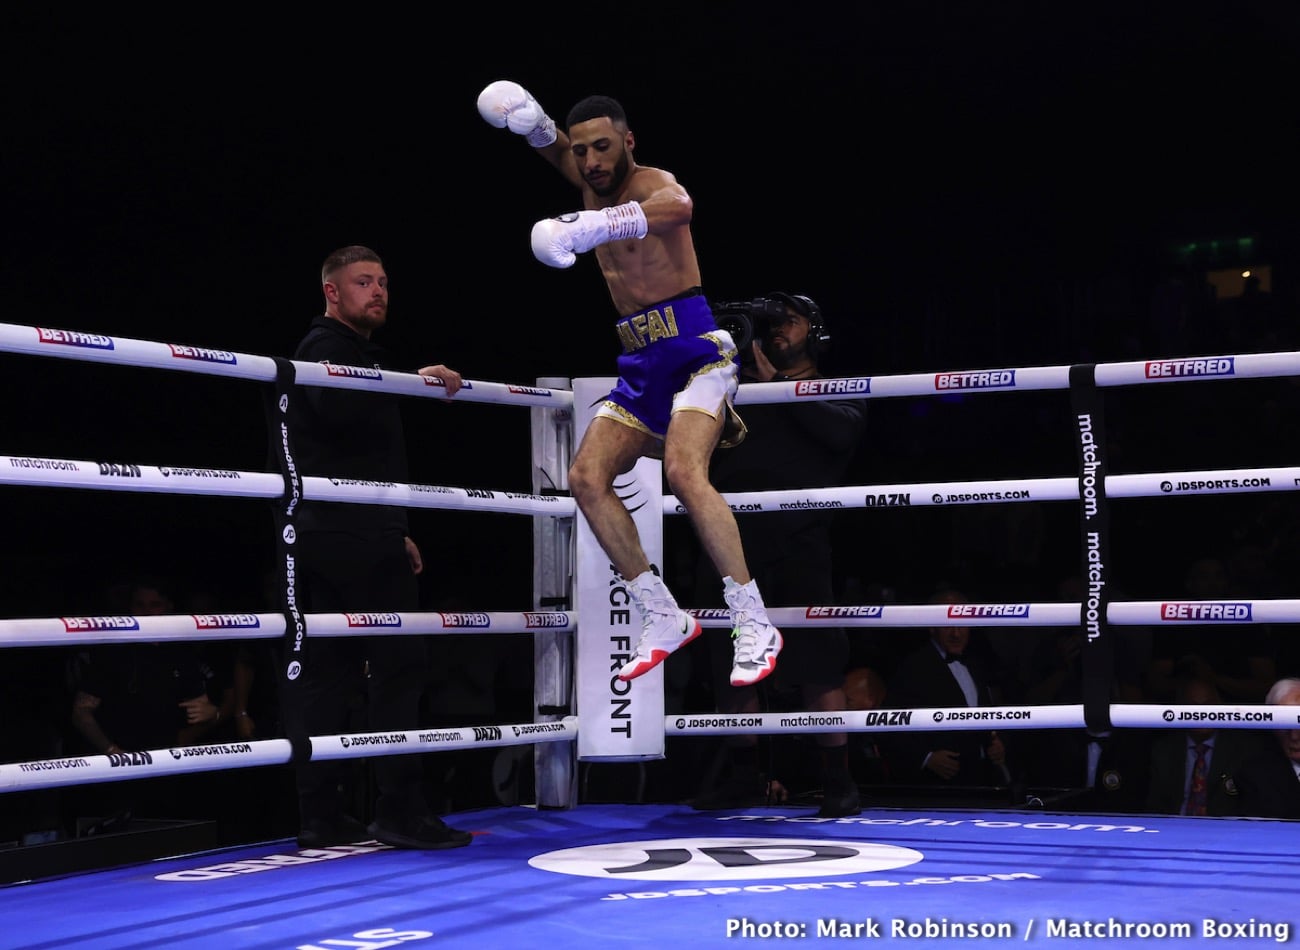 Gamal Yafai destroys Tommy Frank in first round - Boxing results